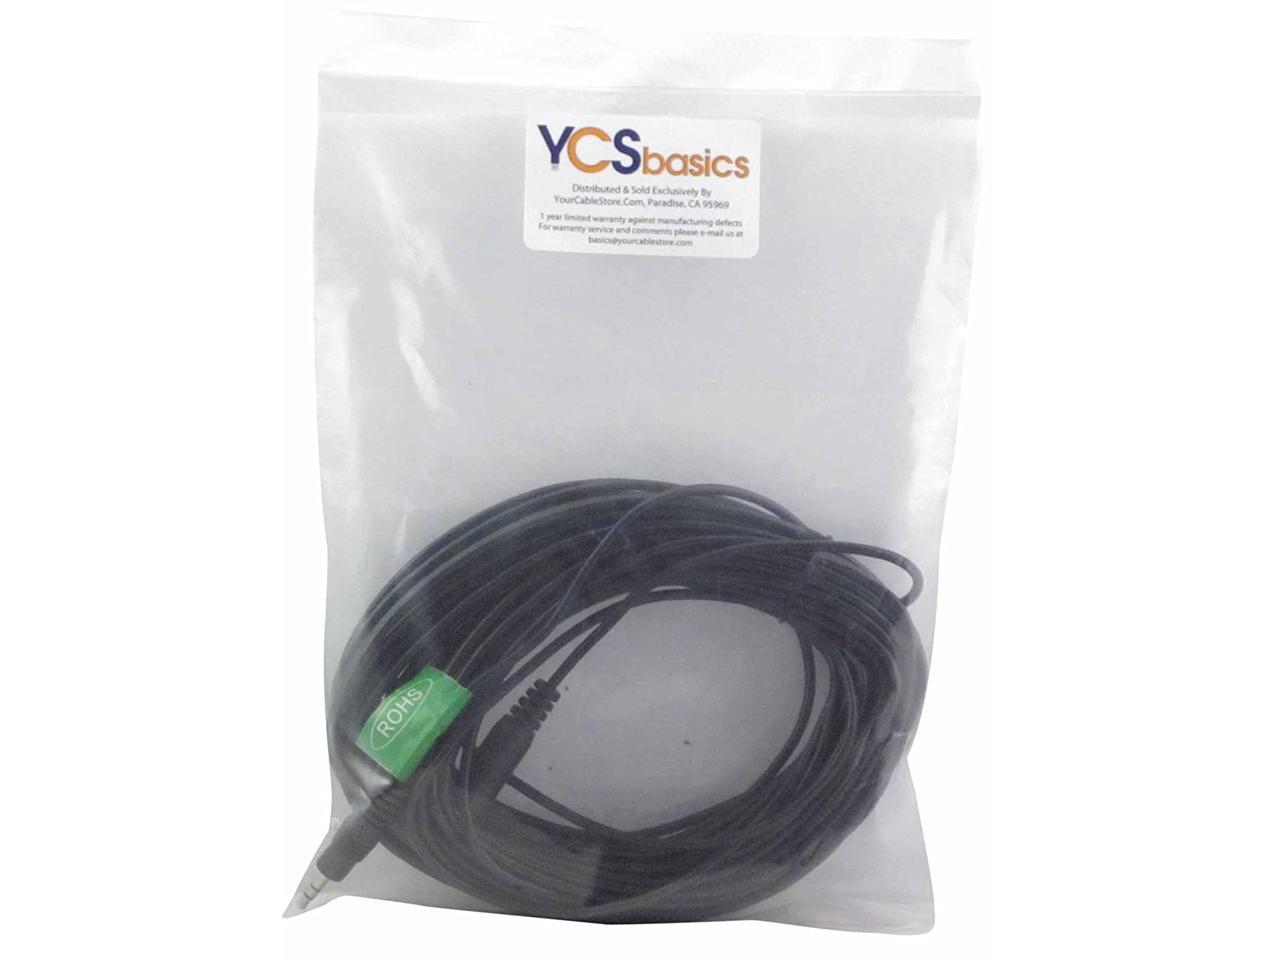 YCS Basics 6 Foot 3.5mm Stereo Headphone/AUX Extension Cable Male/Female 